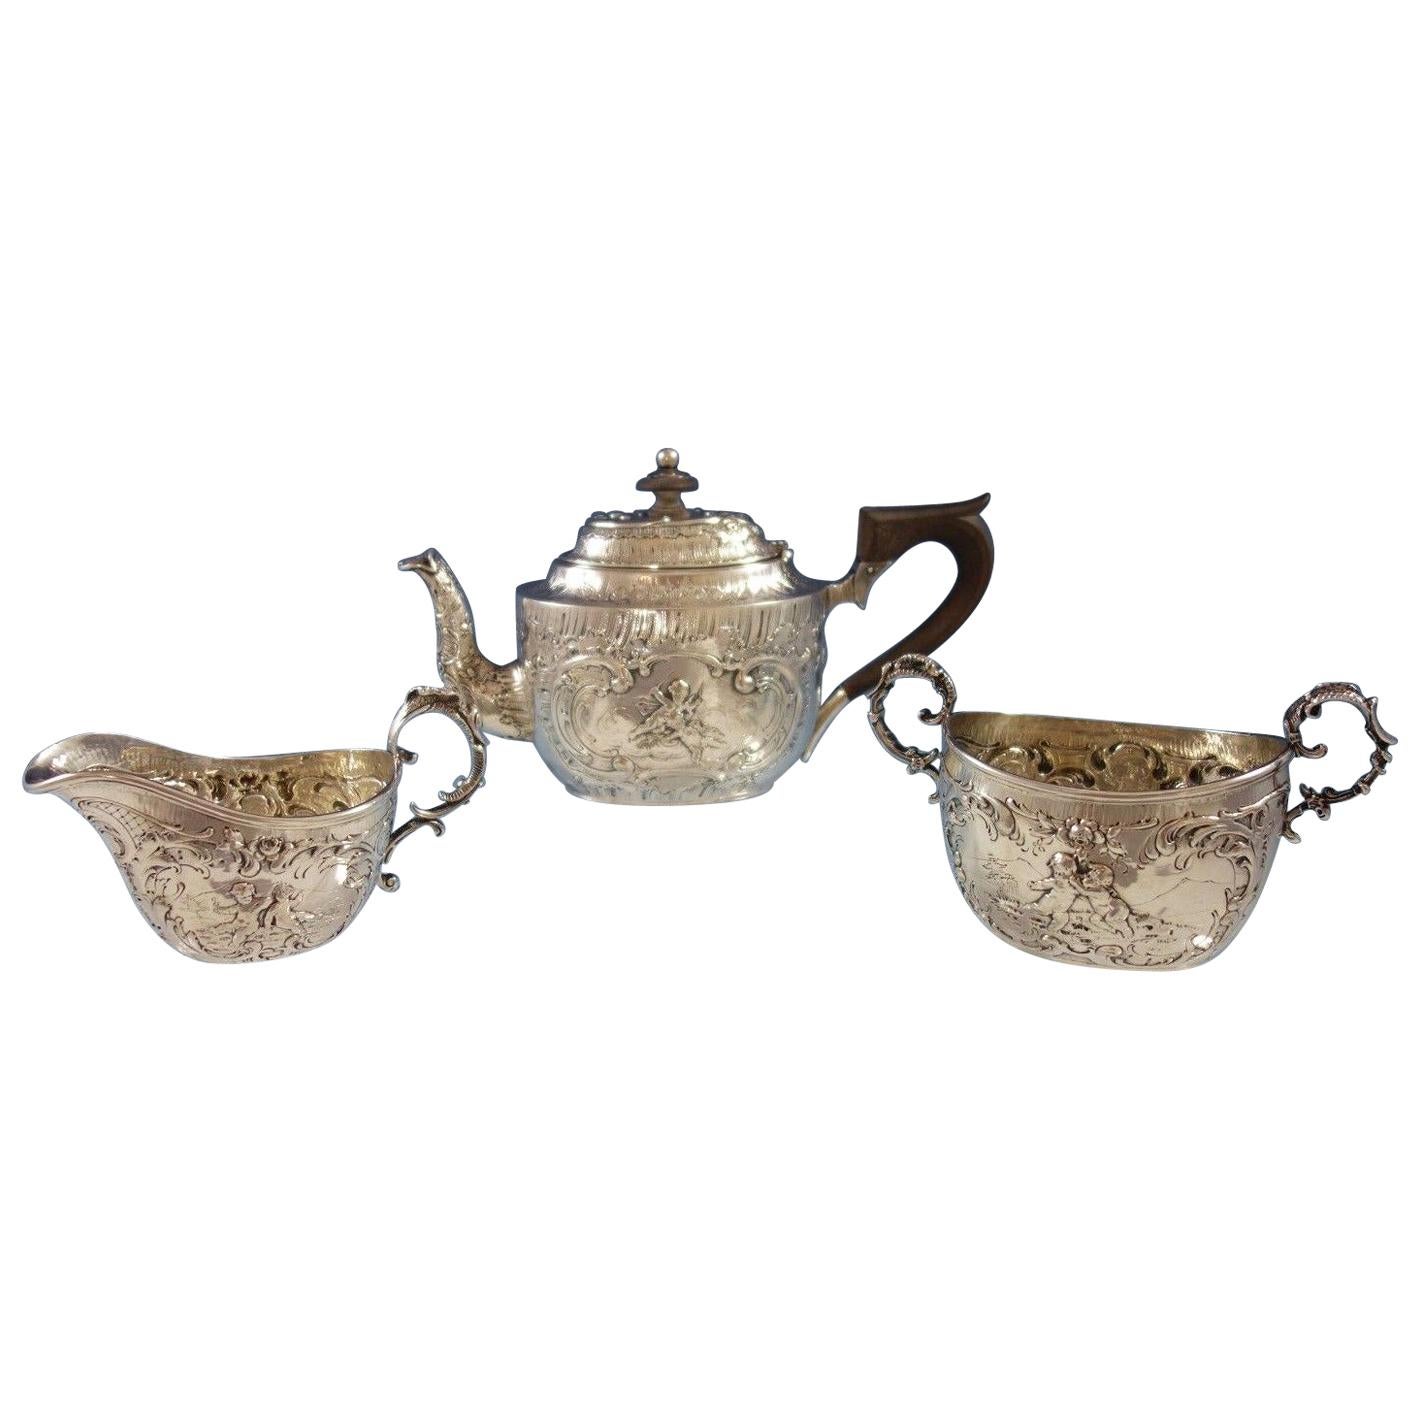 German, .800 Silver Tea Set of 3-Piece Figural Repoussed Cupids and Flowers